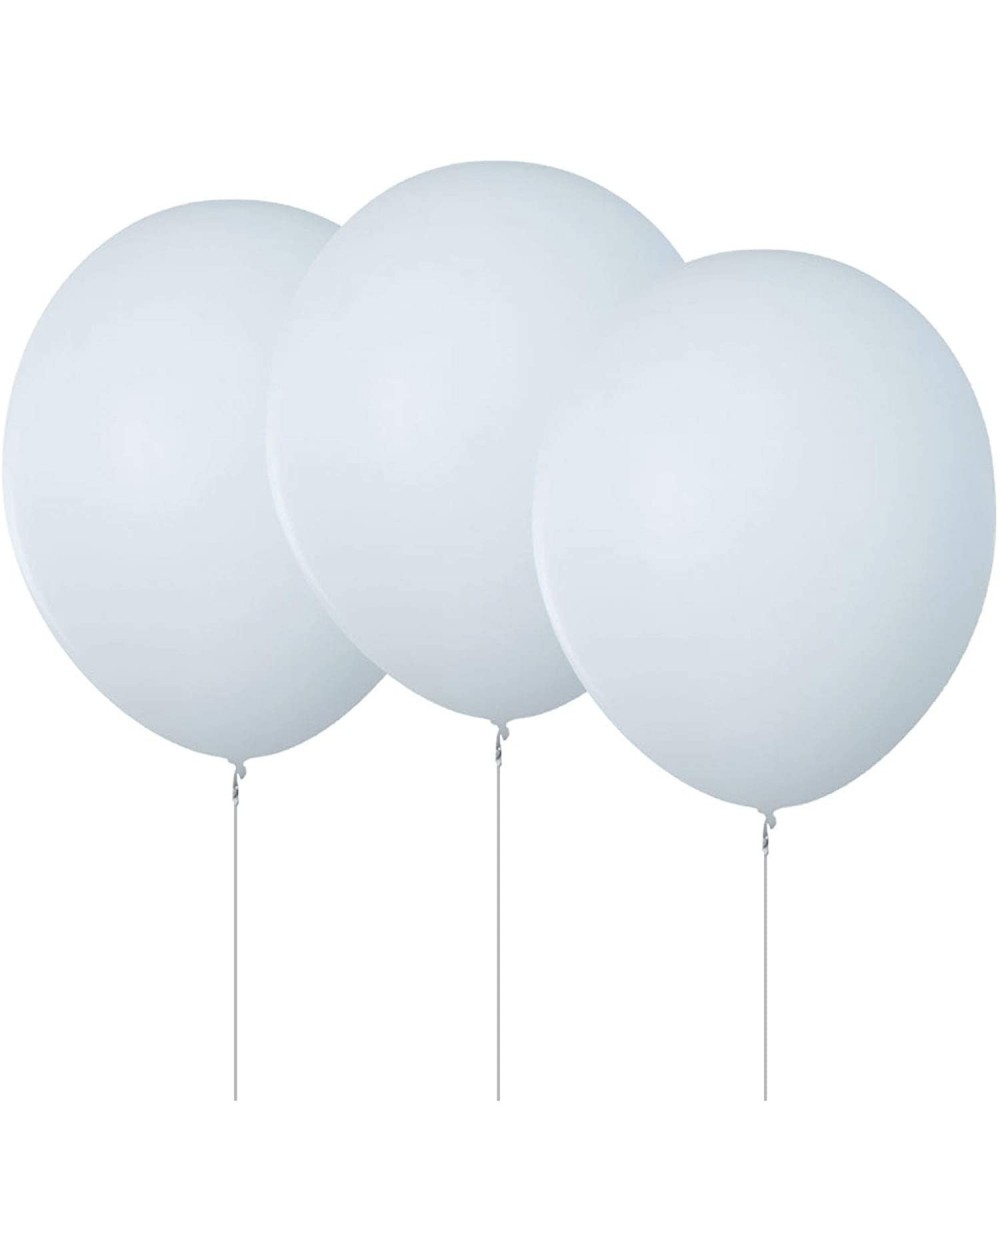 Balloons 18 Inch White Balloons Party Latex Balloon-Pack of 24 - 18inch-white - CT1989IYG89 $8.66